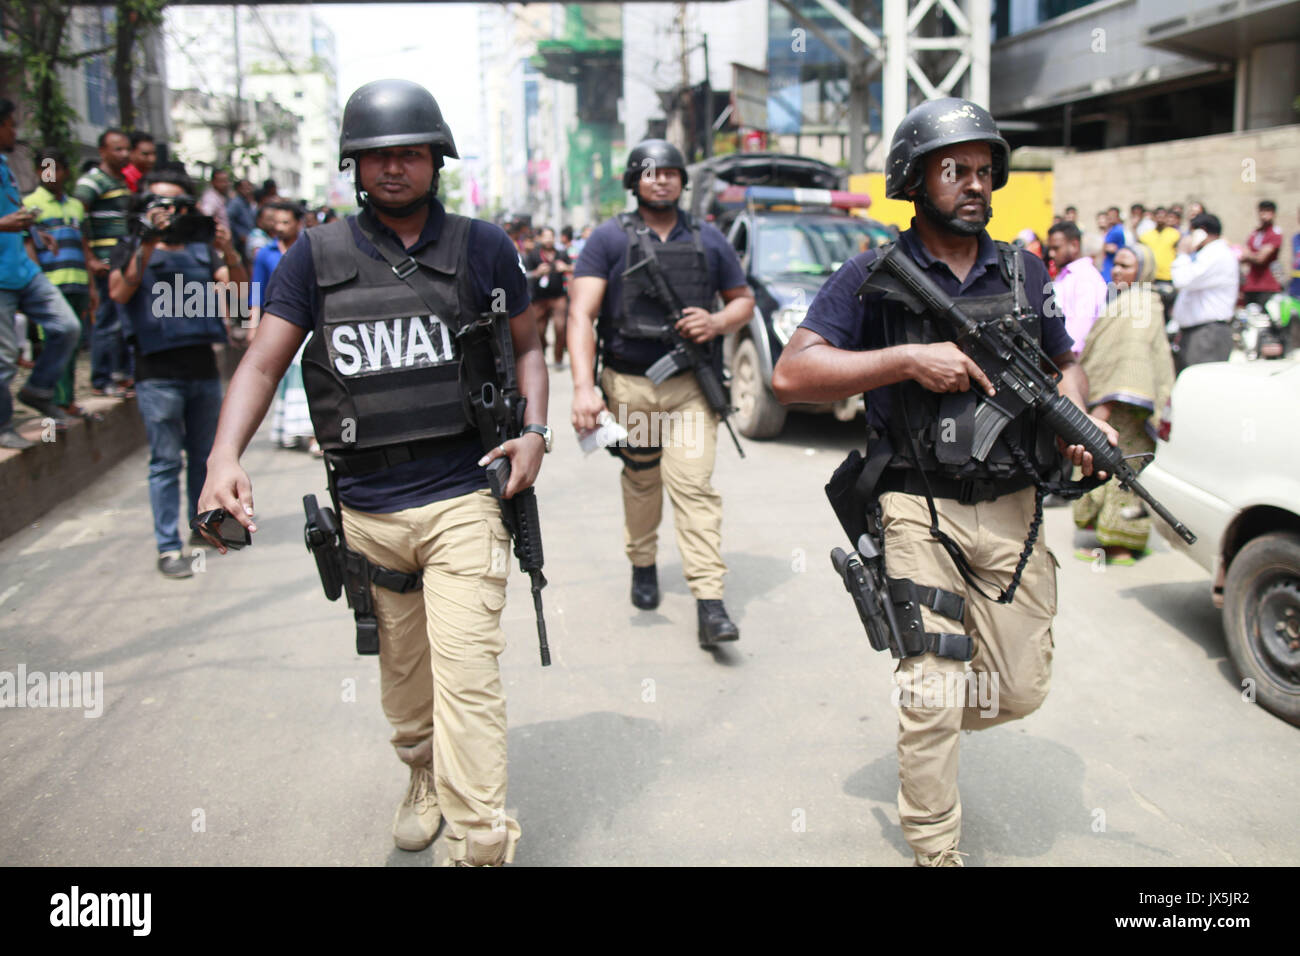 Dhaka, Bangladesh. 15th Aug, 2017. SWAT (Special Weapons And Tactics) team of Bangladesh police leave the shooting scene after they tried to flush out suspected Islamist radicals who have holed up in a building in Dhaka, Bangladesh. Credit: Suvra Kanti Das/ZUMA Wire/Alamy Live News Stock Photo